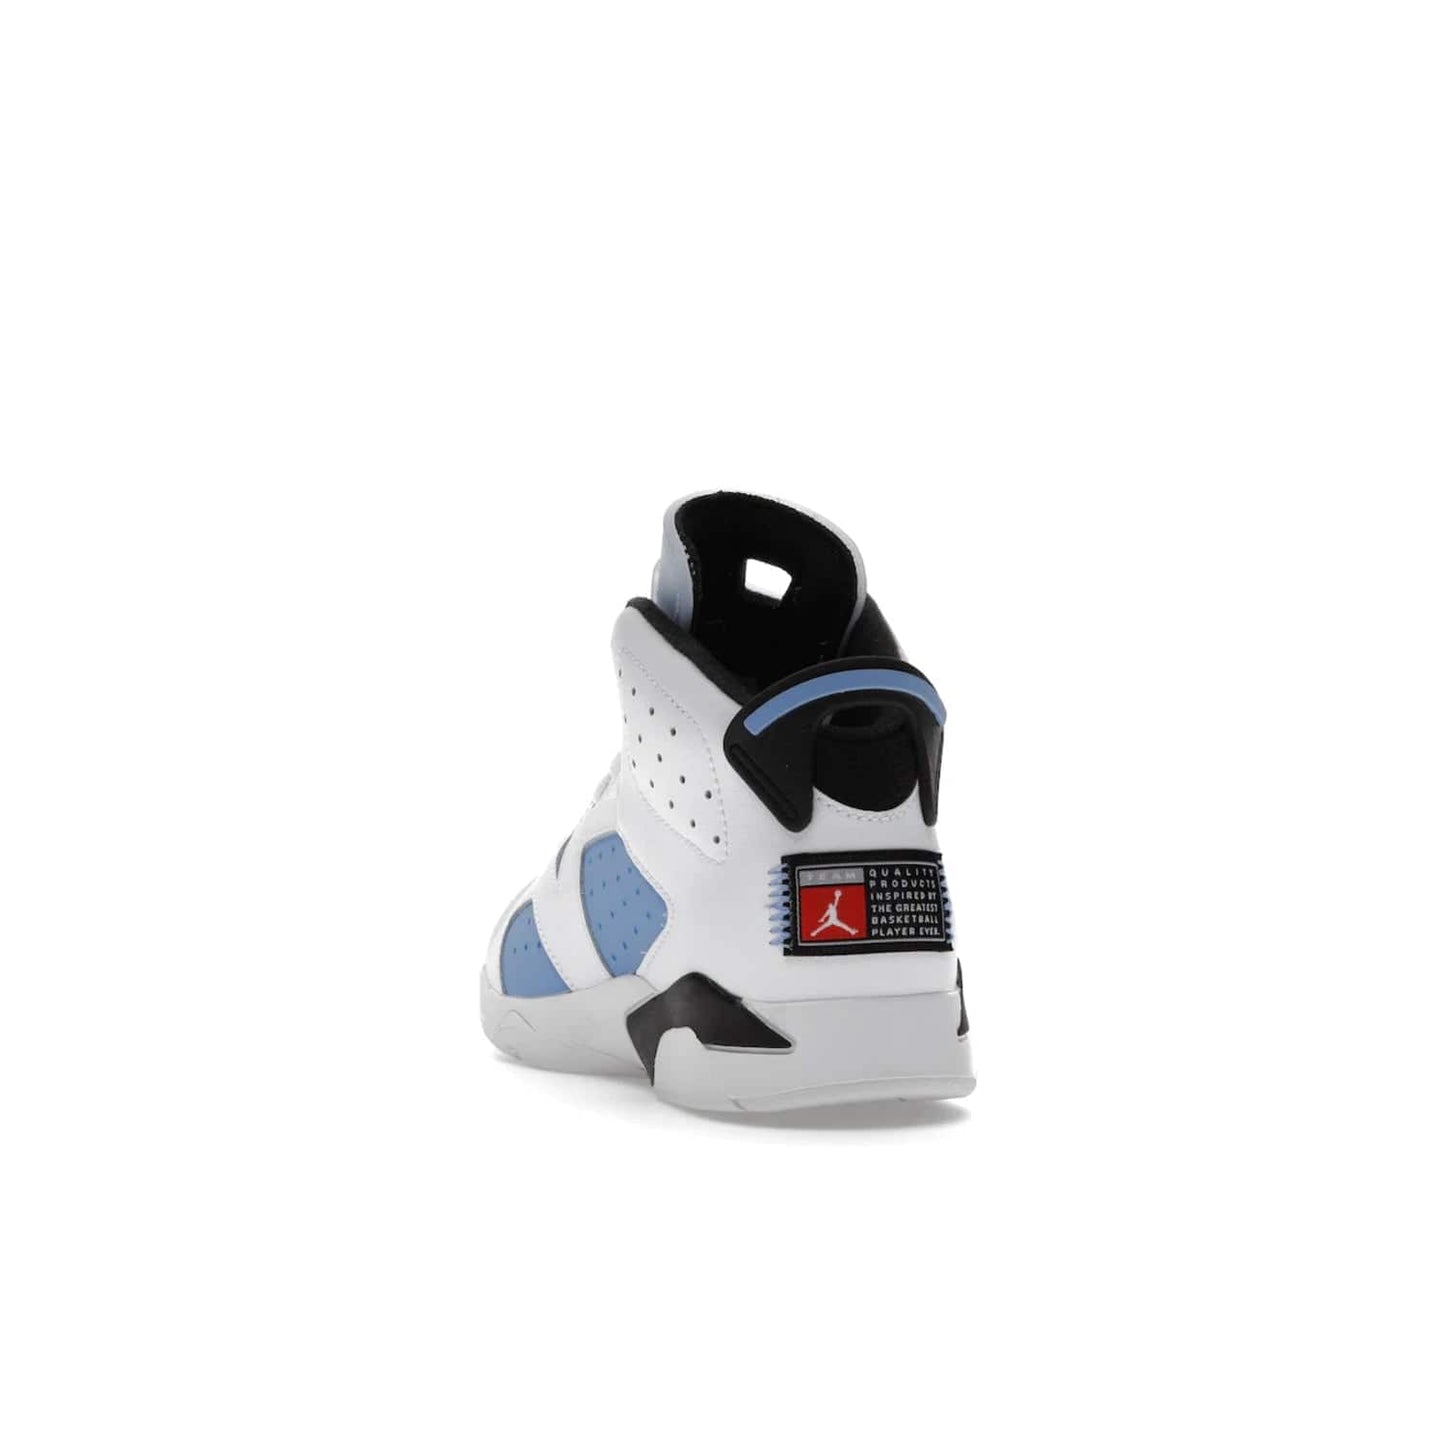 Jordan 6 Retro UNC White (PS) - Image 26 - Only at www.BallersClubKickz.com - The Air Jordan 6 Retro UNC White PS celebrates Michael Jordan's alma mater, the University of North Carolina. It features a classic color-blocking of the iconic Jordan 6 Carmine and a stitched Jordan Team patch. This must-have sneaker released on April 27th, 2022. Referencing the university colors, get this shoe for a stylish and timeless style with university pride.